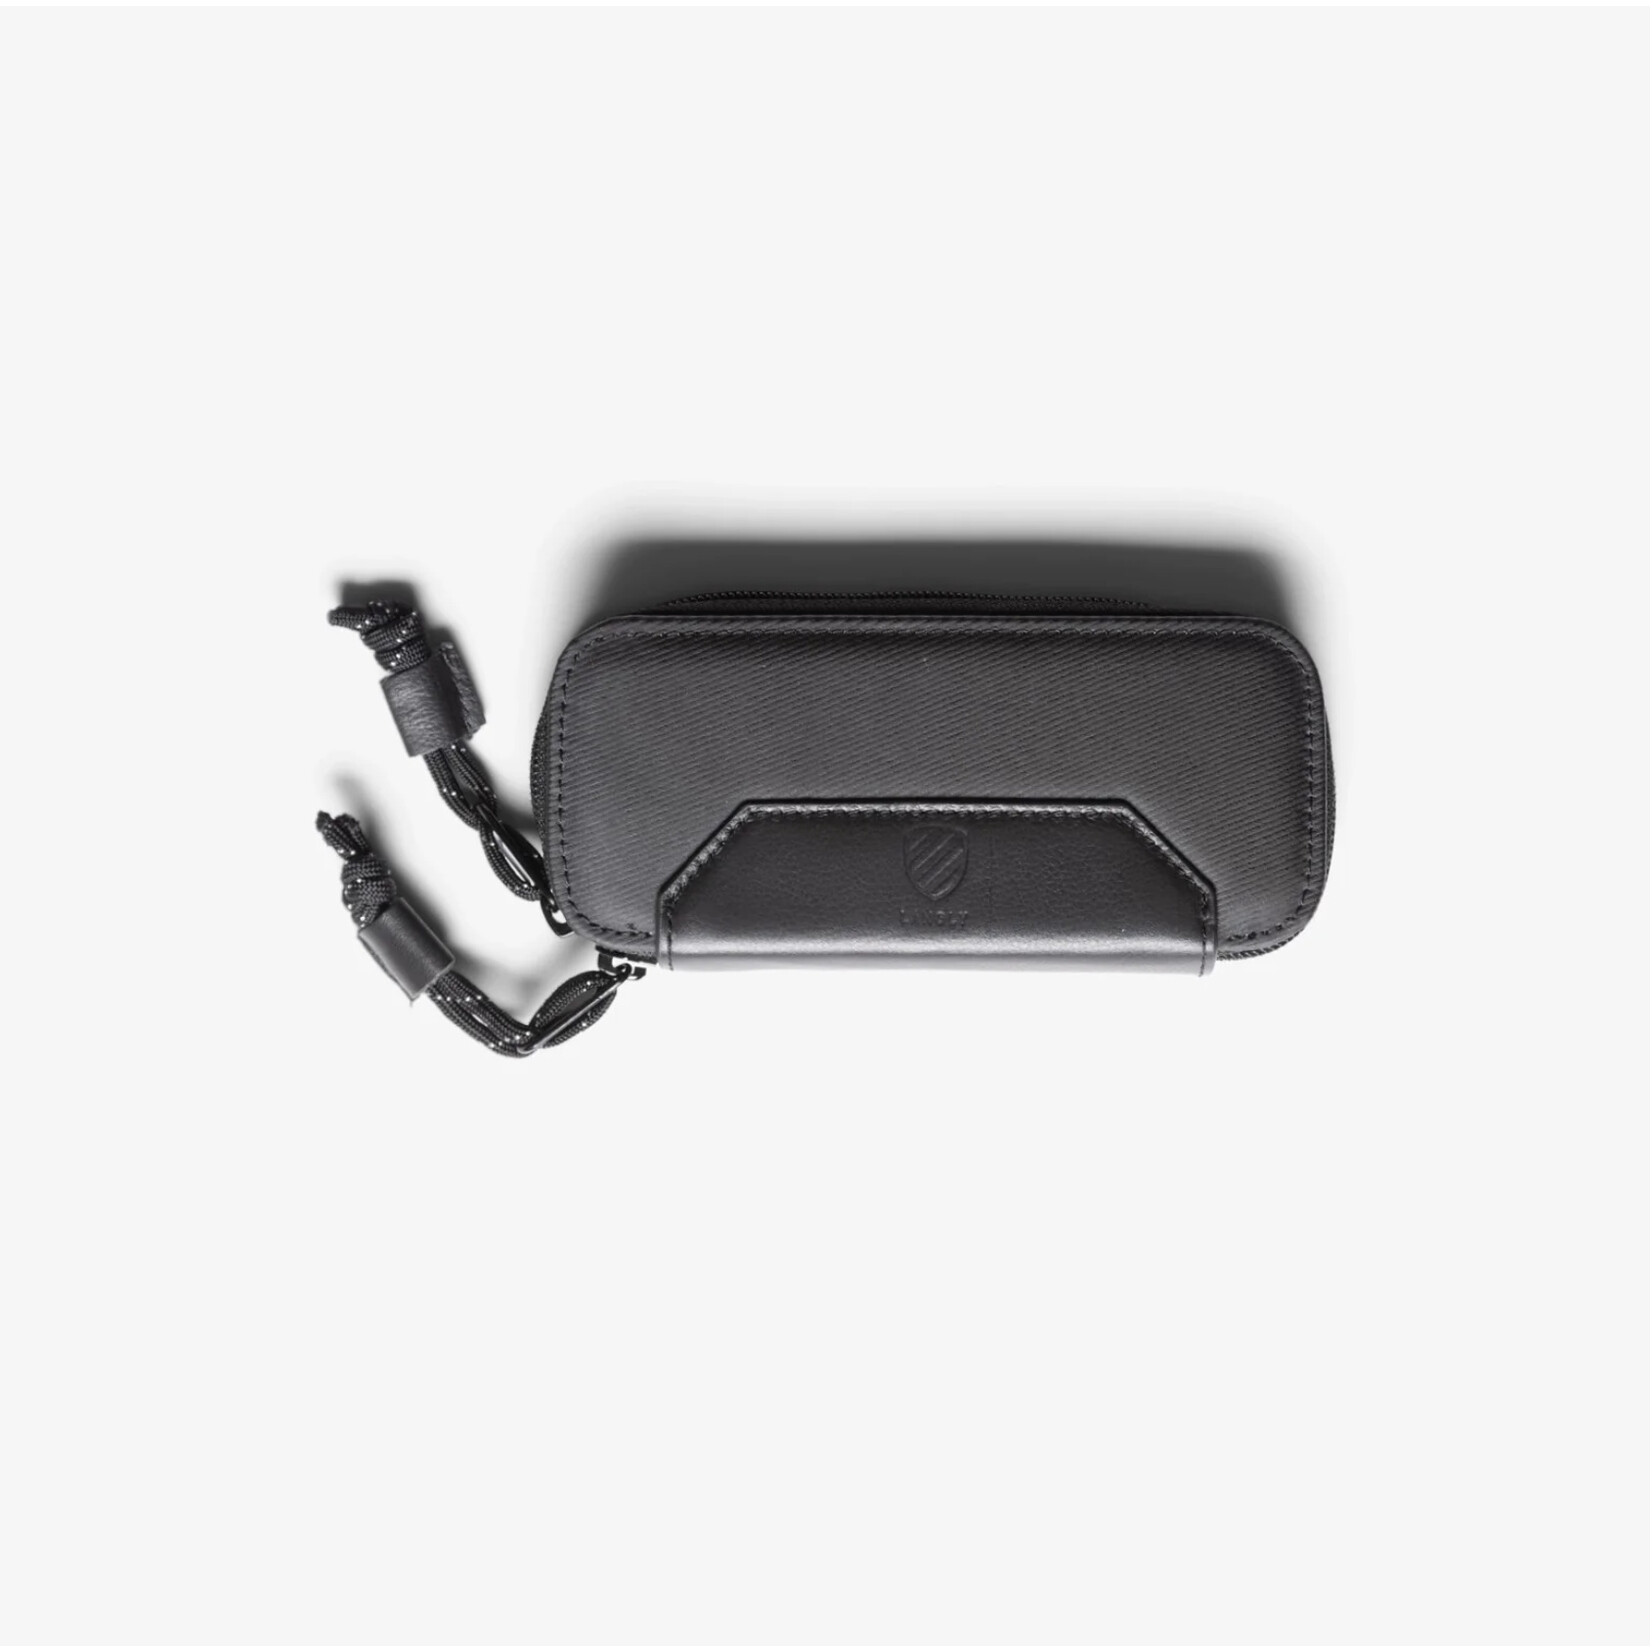 Langly Memory Card Case